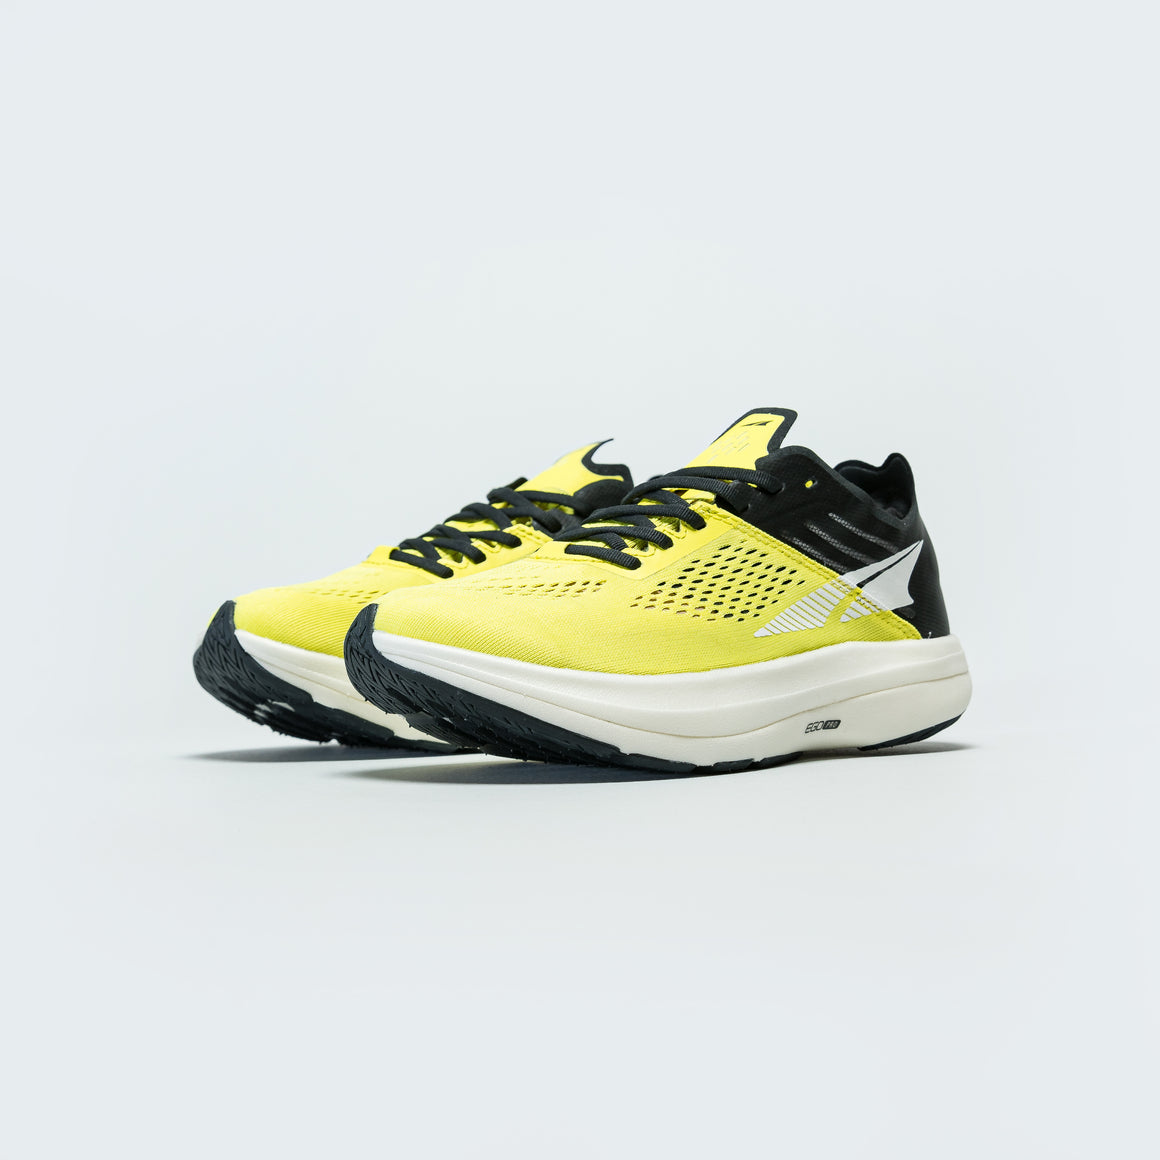 Altra - Womens Vanish Carbon - Black/Yellow - Up There Athletics